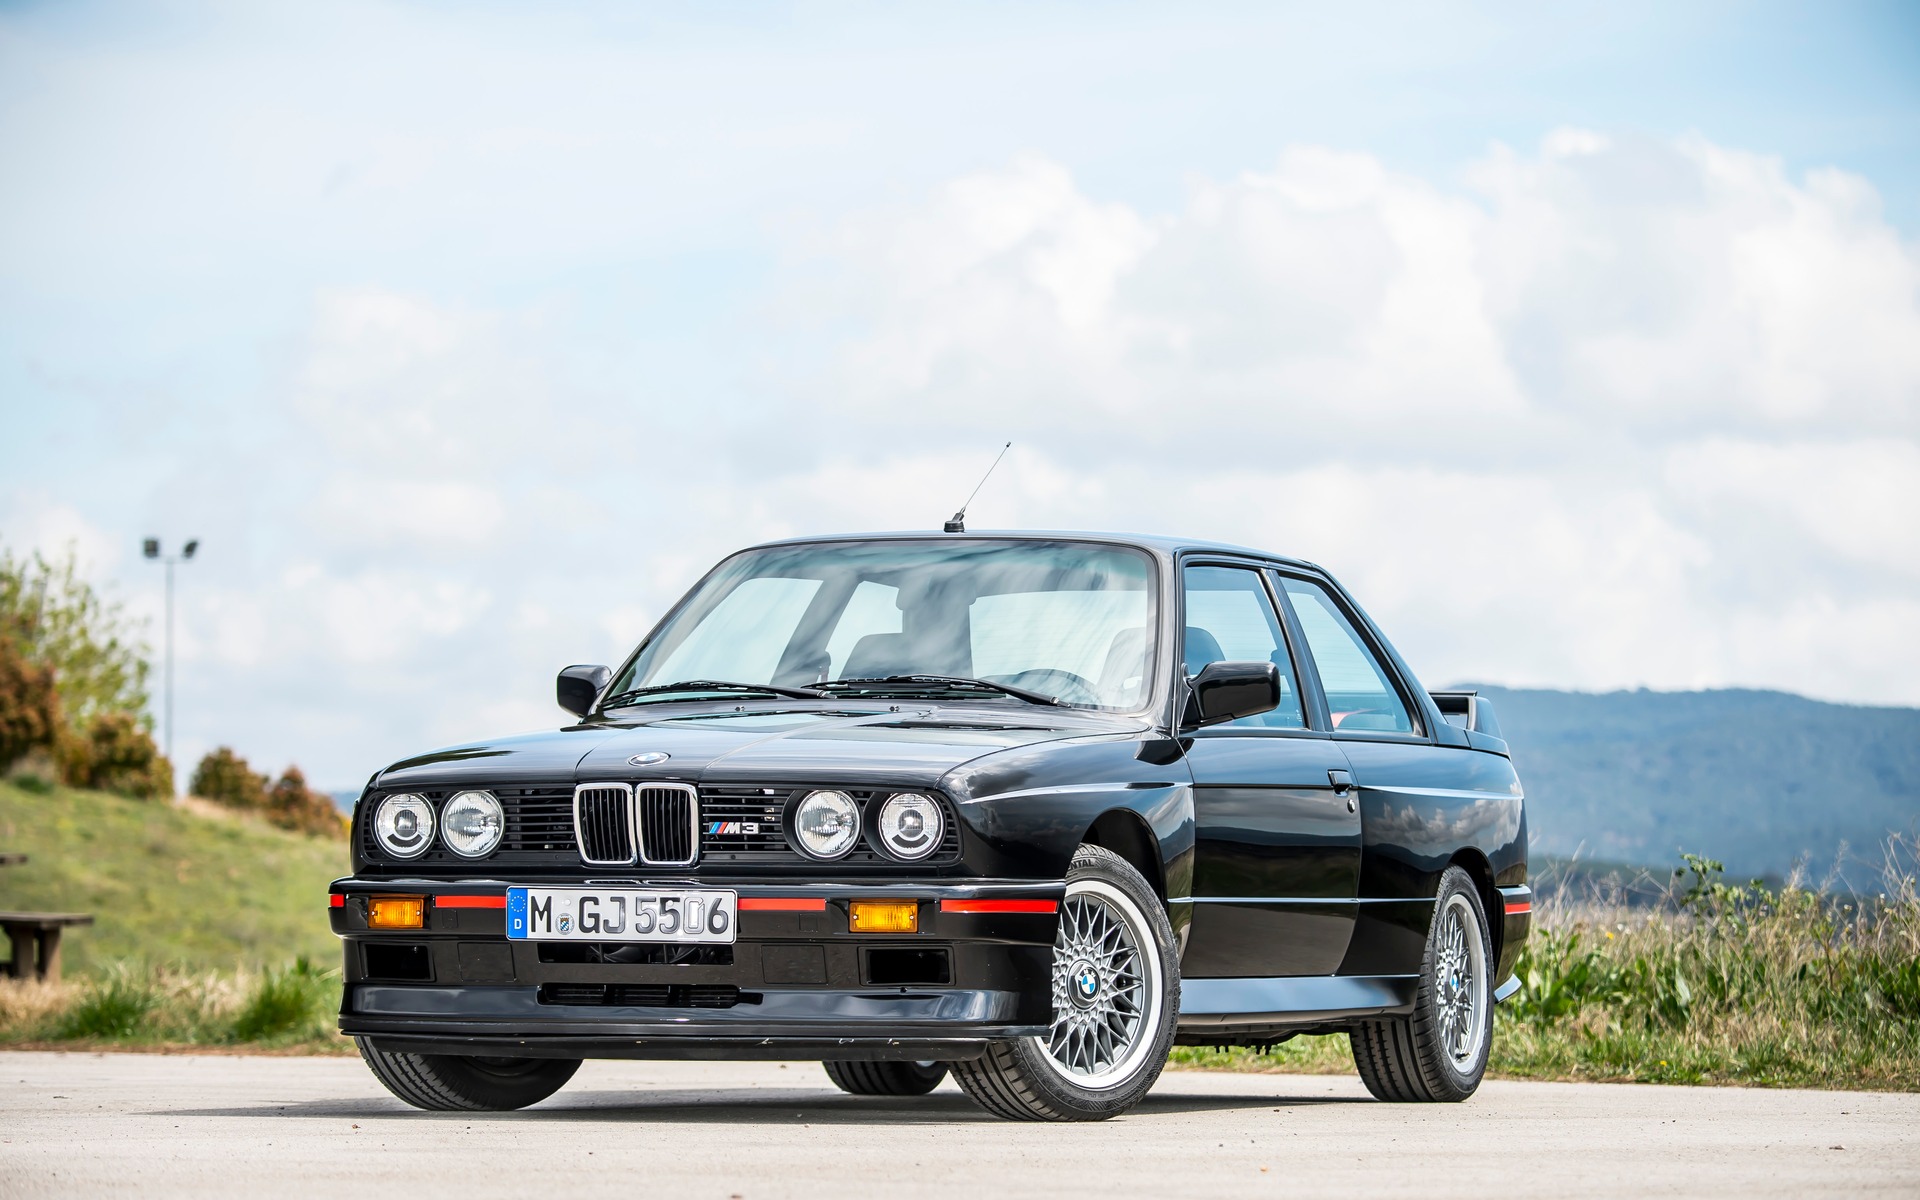 The first BMW M3 harkens back to 1987